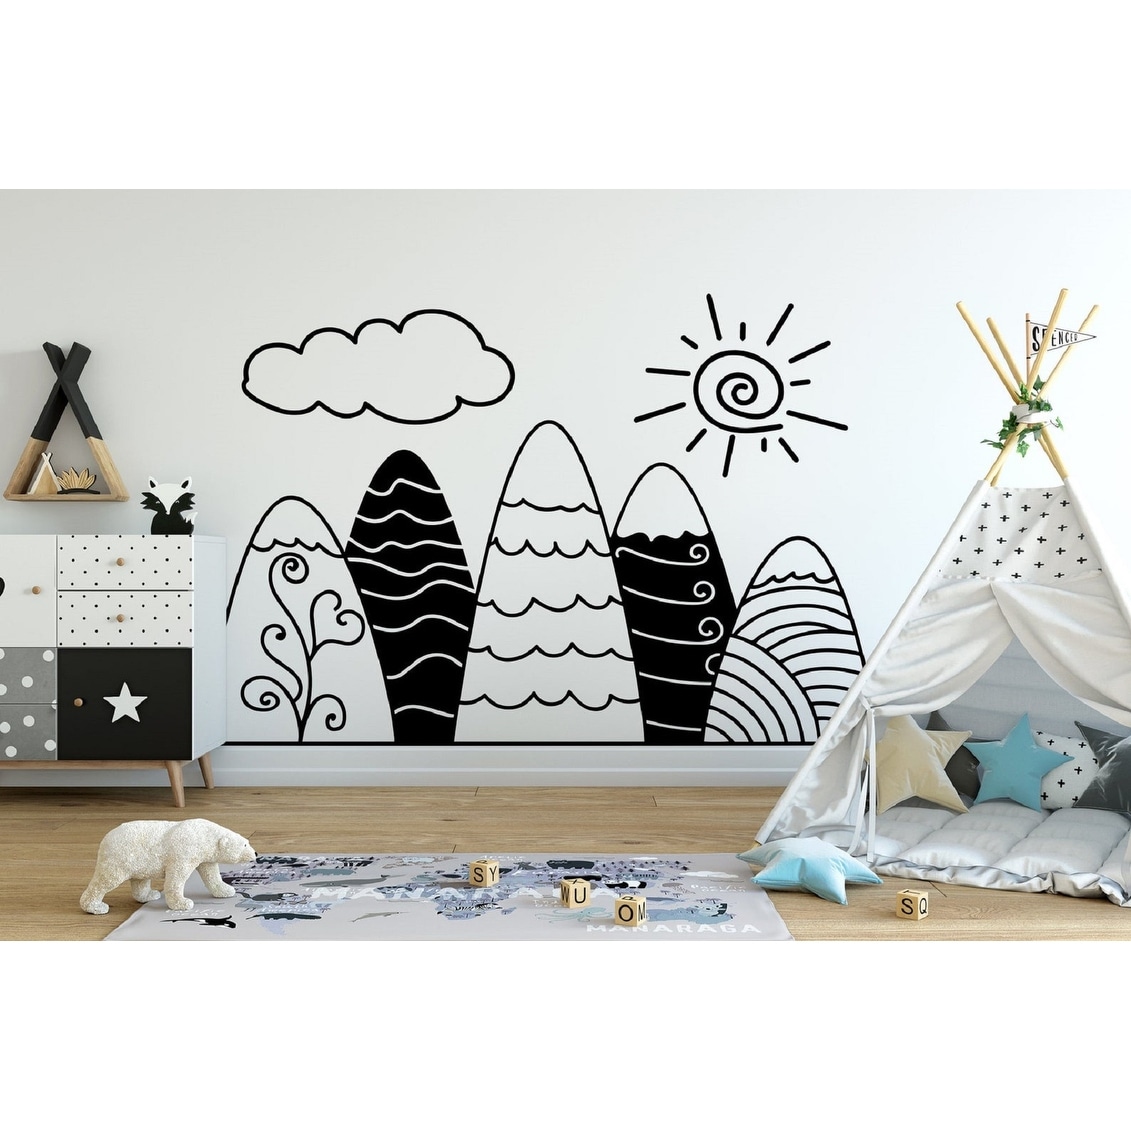 Large Mountains Wall Stickers Nursery Kids Bedroom Decal Vinyl Decoration Home